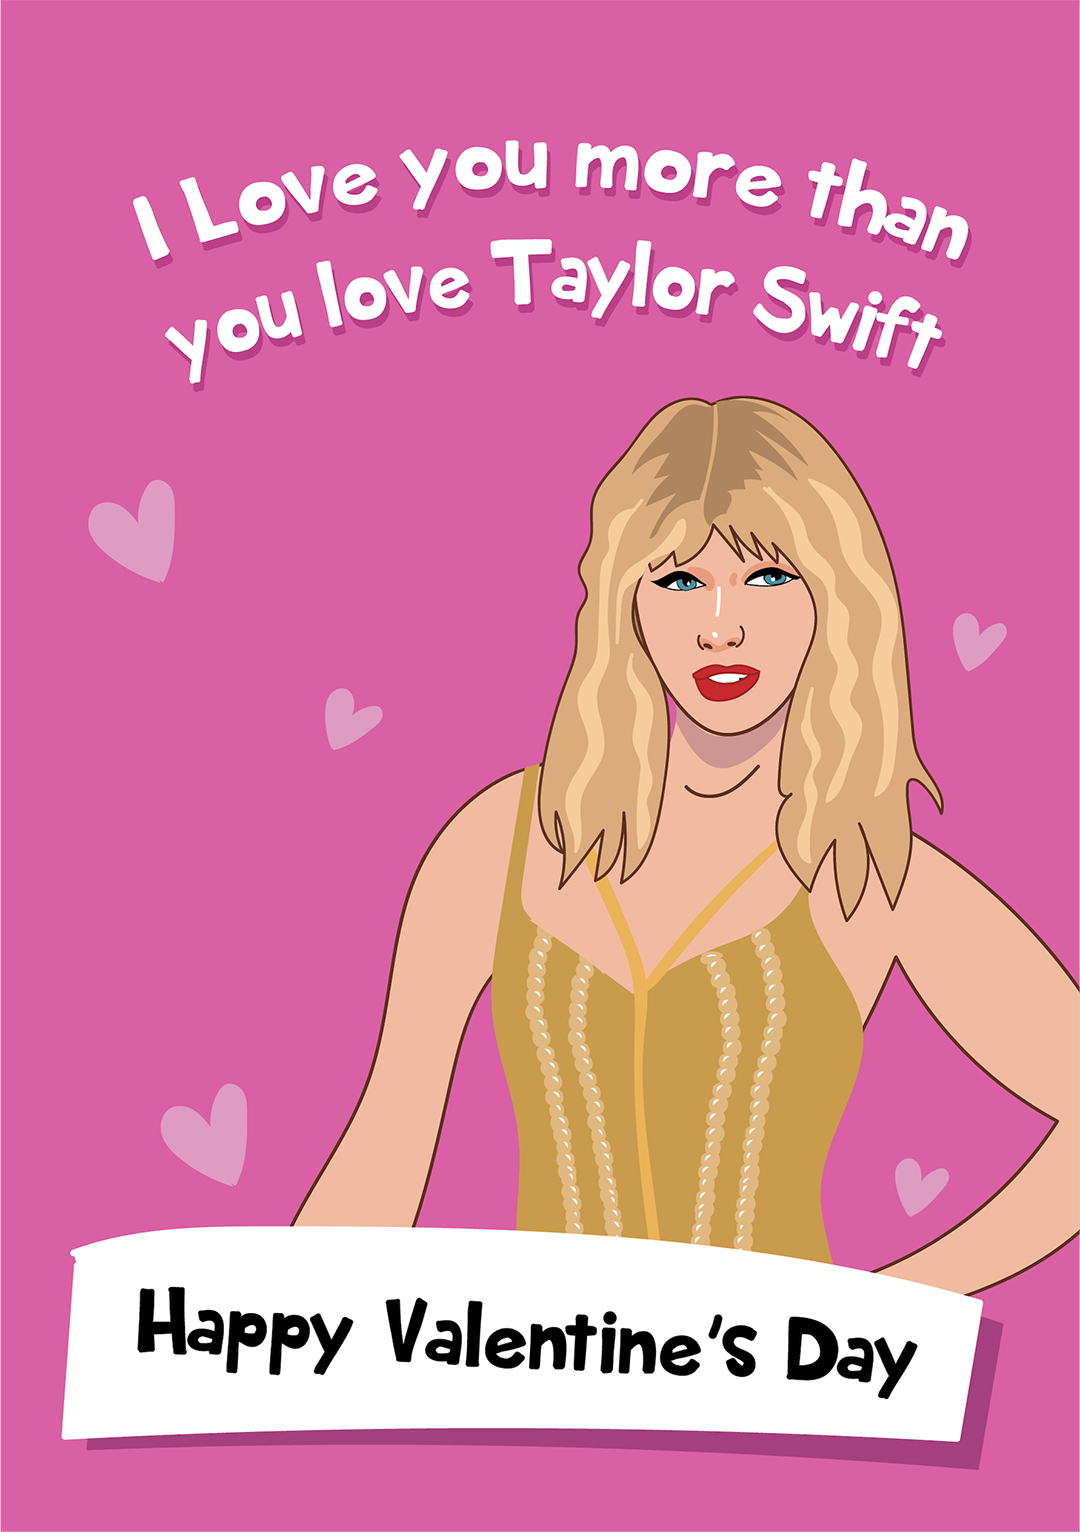 I Love You More Than You Love Taylor Swift - Valentine's Day Card